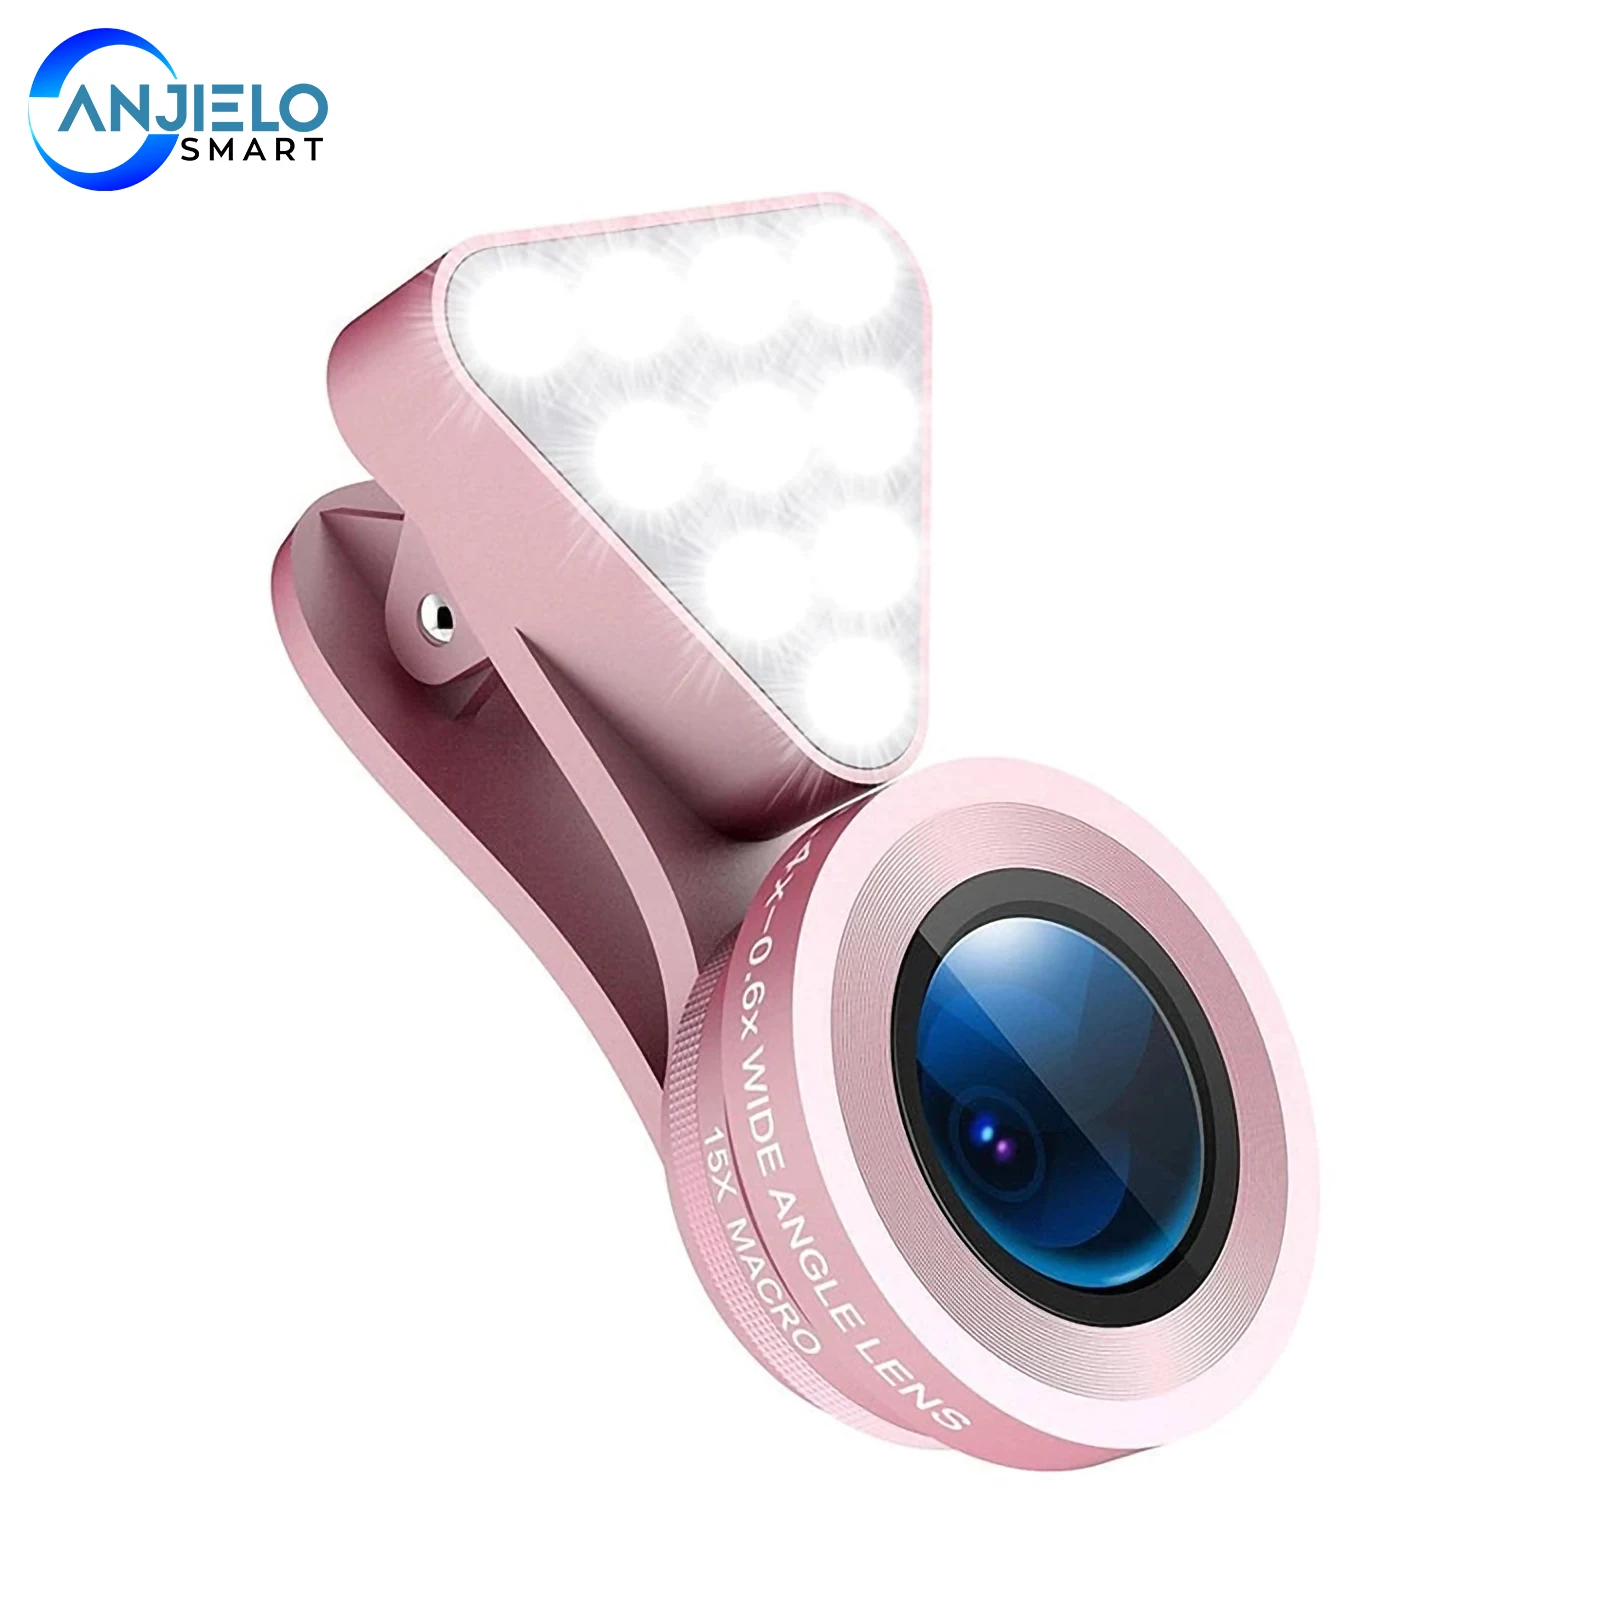 

Anjielosmart New 2 in 1 Cell Phone Lens Rechargeable Selfie LED Macro 0.4X-0.6X Wide Angle Lens Adjustable Clip On Fill Light